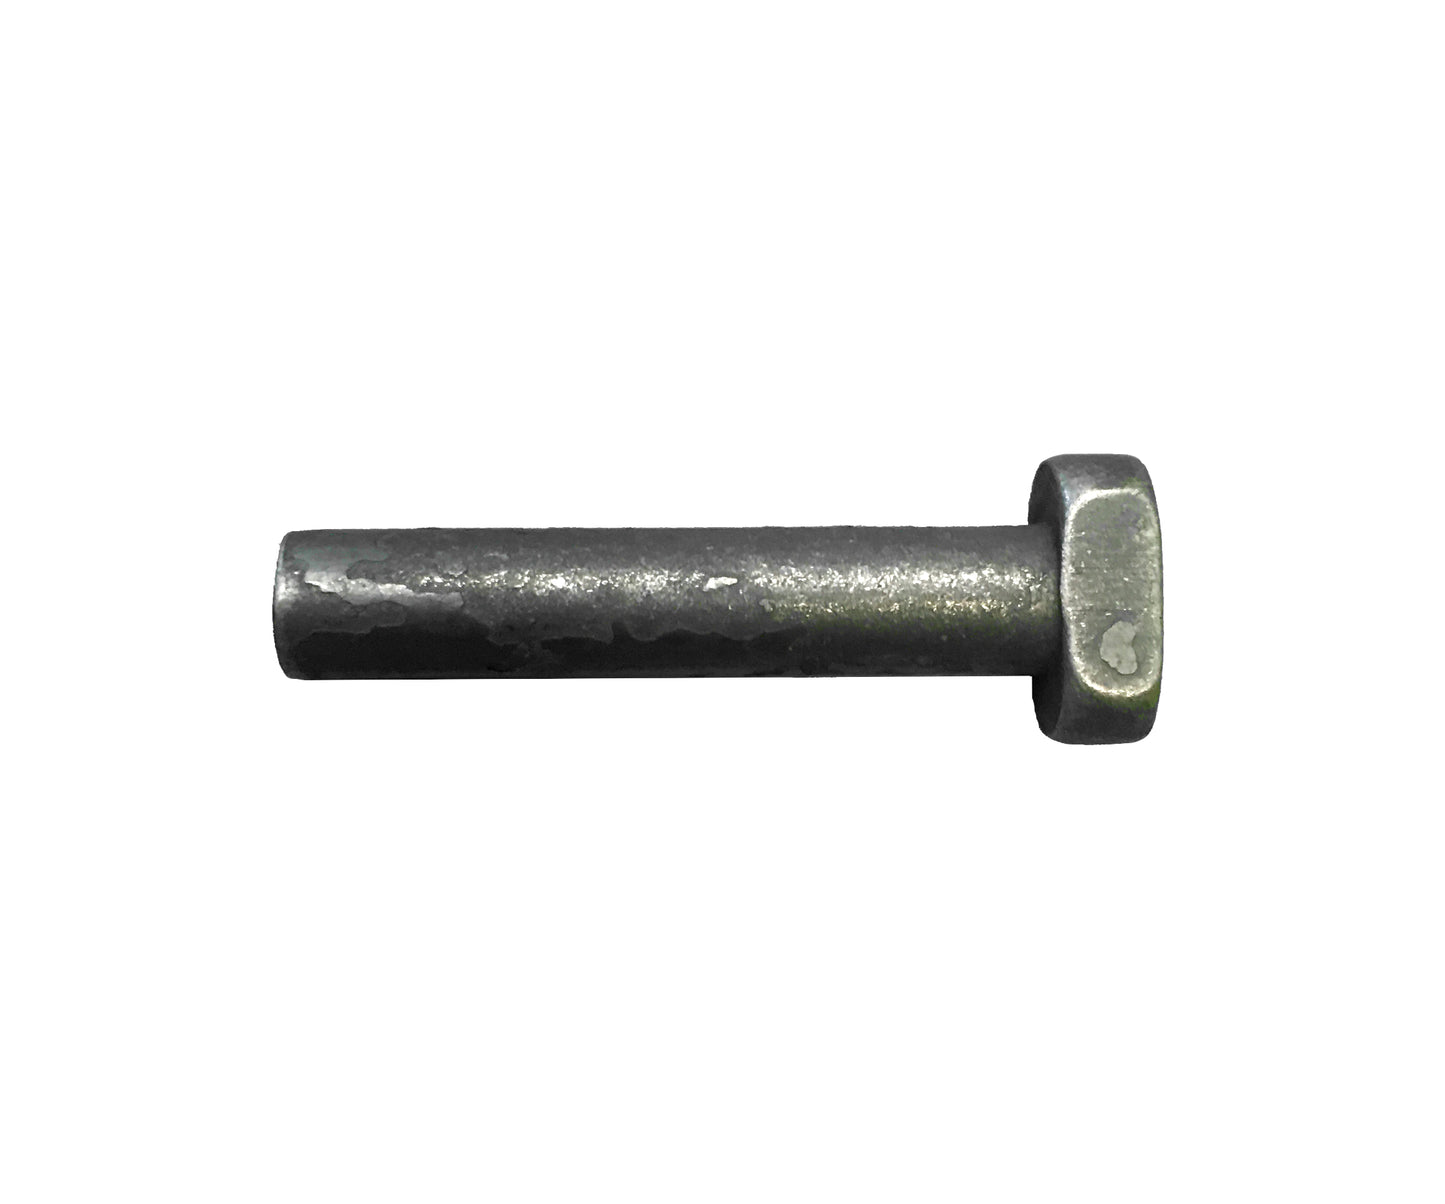 Trencher Repair Link w Pins, fits Many Chain trenchers with 2.0" Pitch